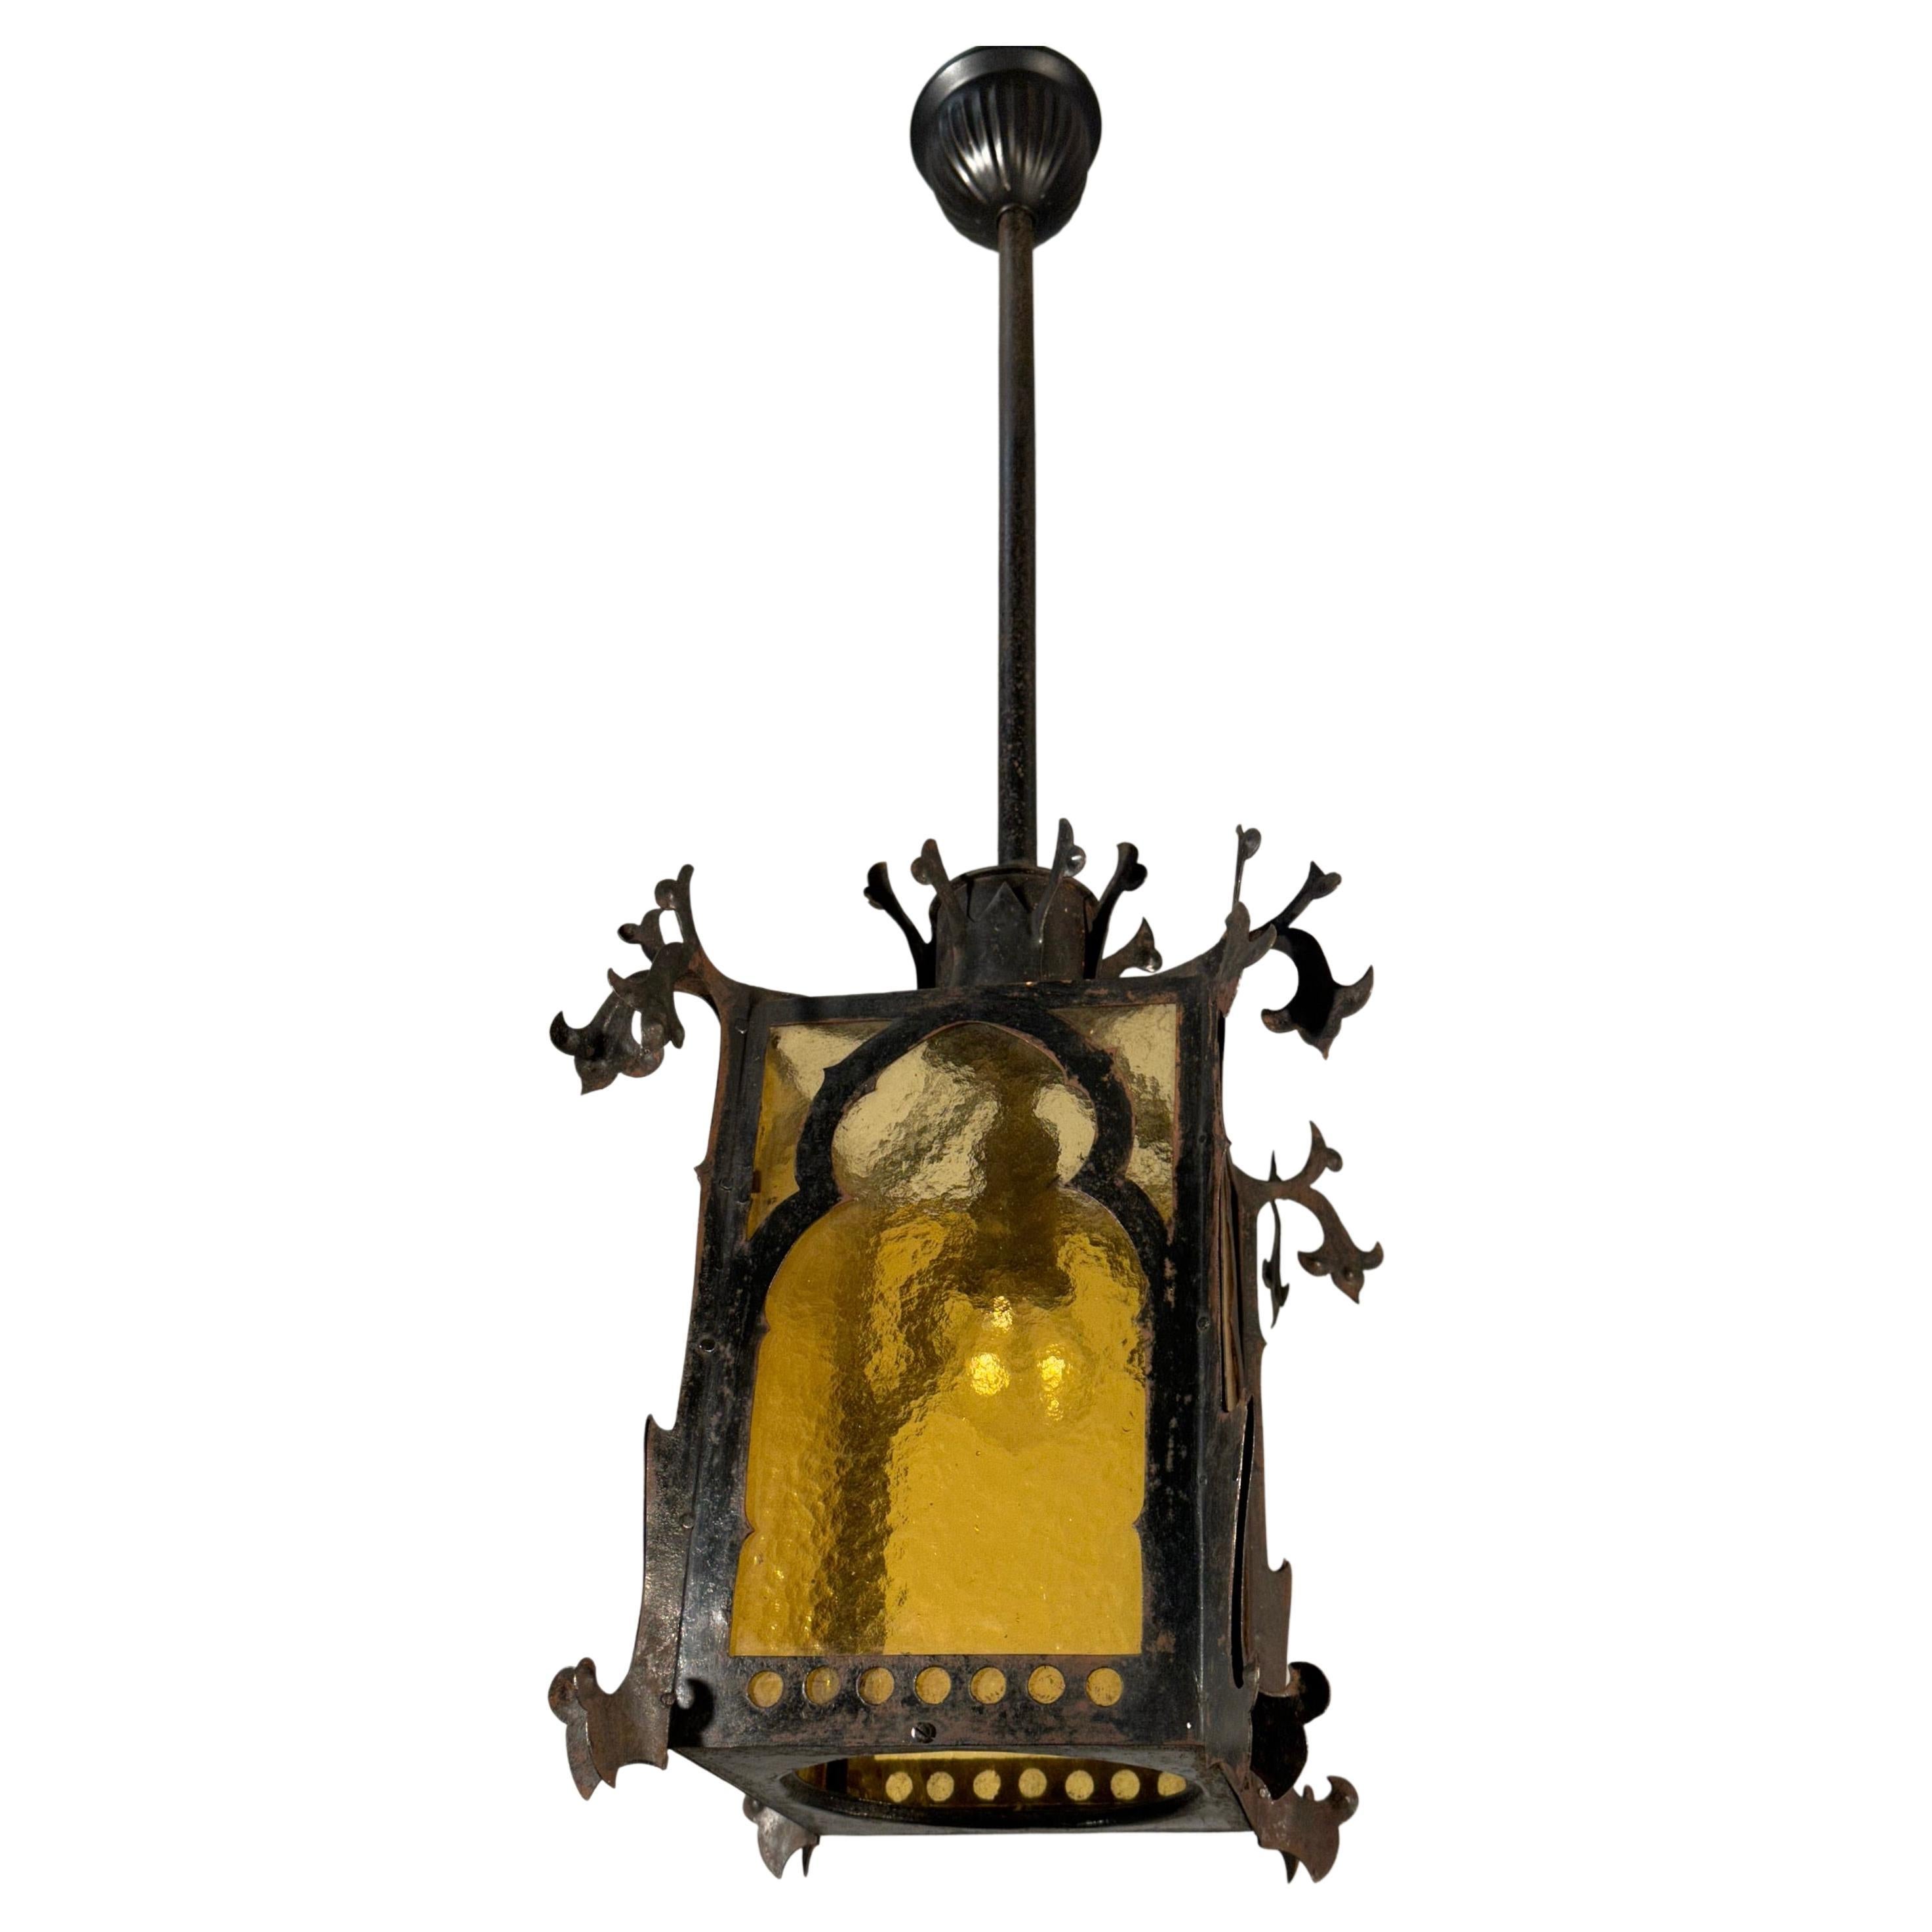 Impressive and all handcrafted, Gothic light fixture.

If you are a collector of rare and all handcrafted Gothic antiques then this one of a kind lantern could be flying your way soon. Over the many decades the natural wear has only made this